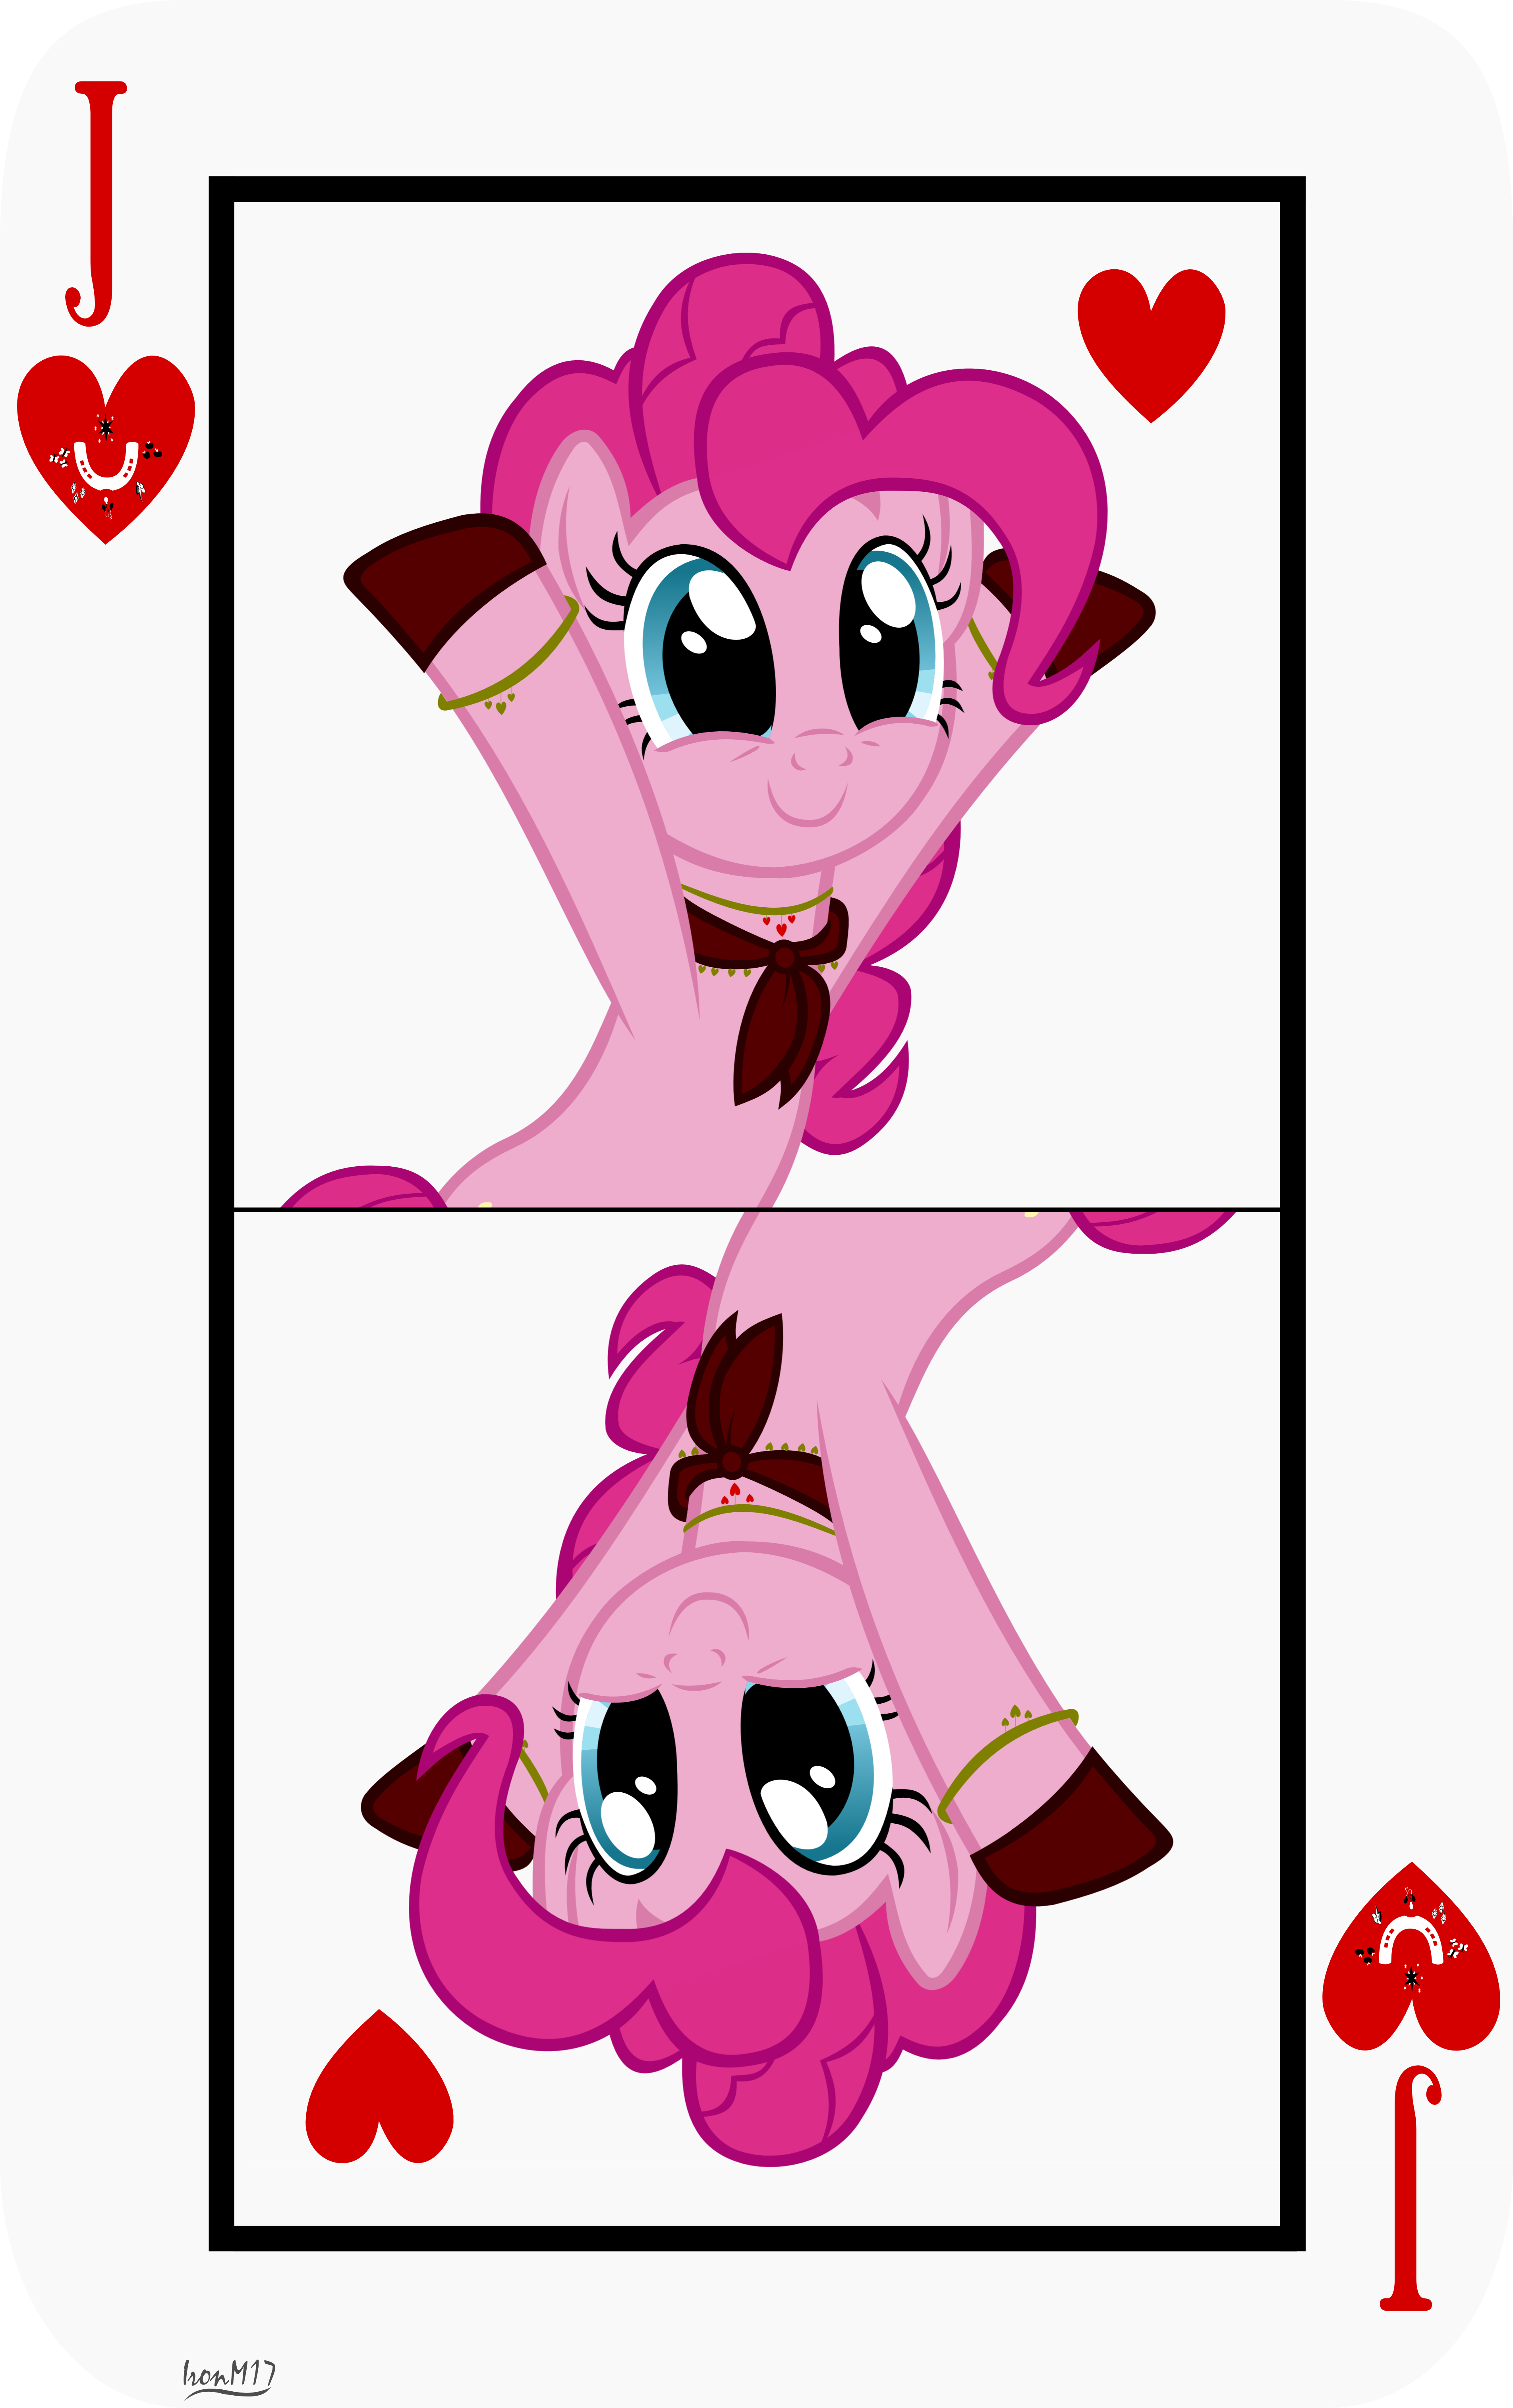 jack_pinkie_of_hearts_by_ironm17-dbmh841